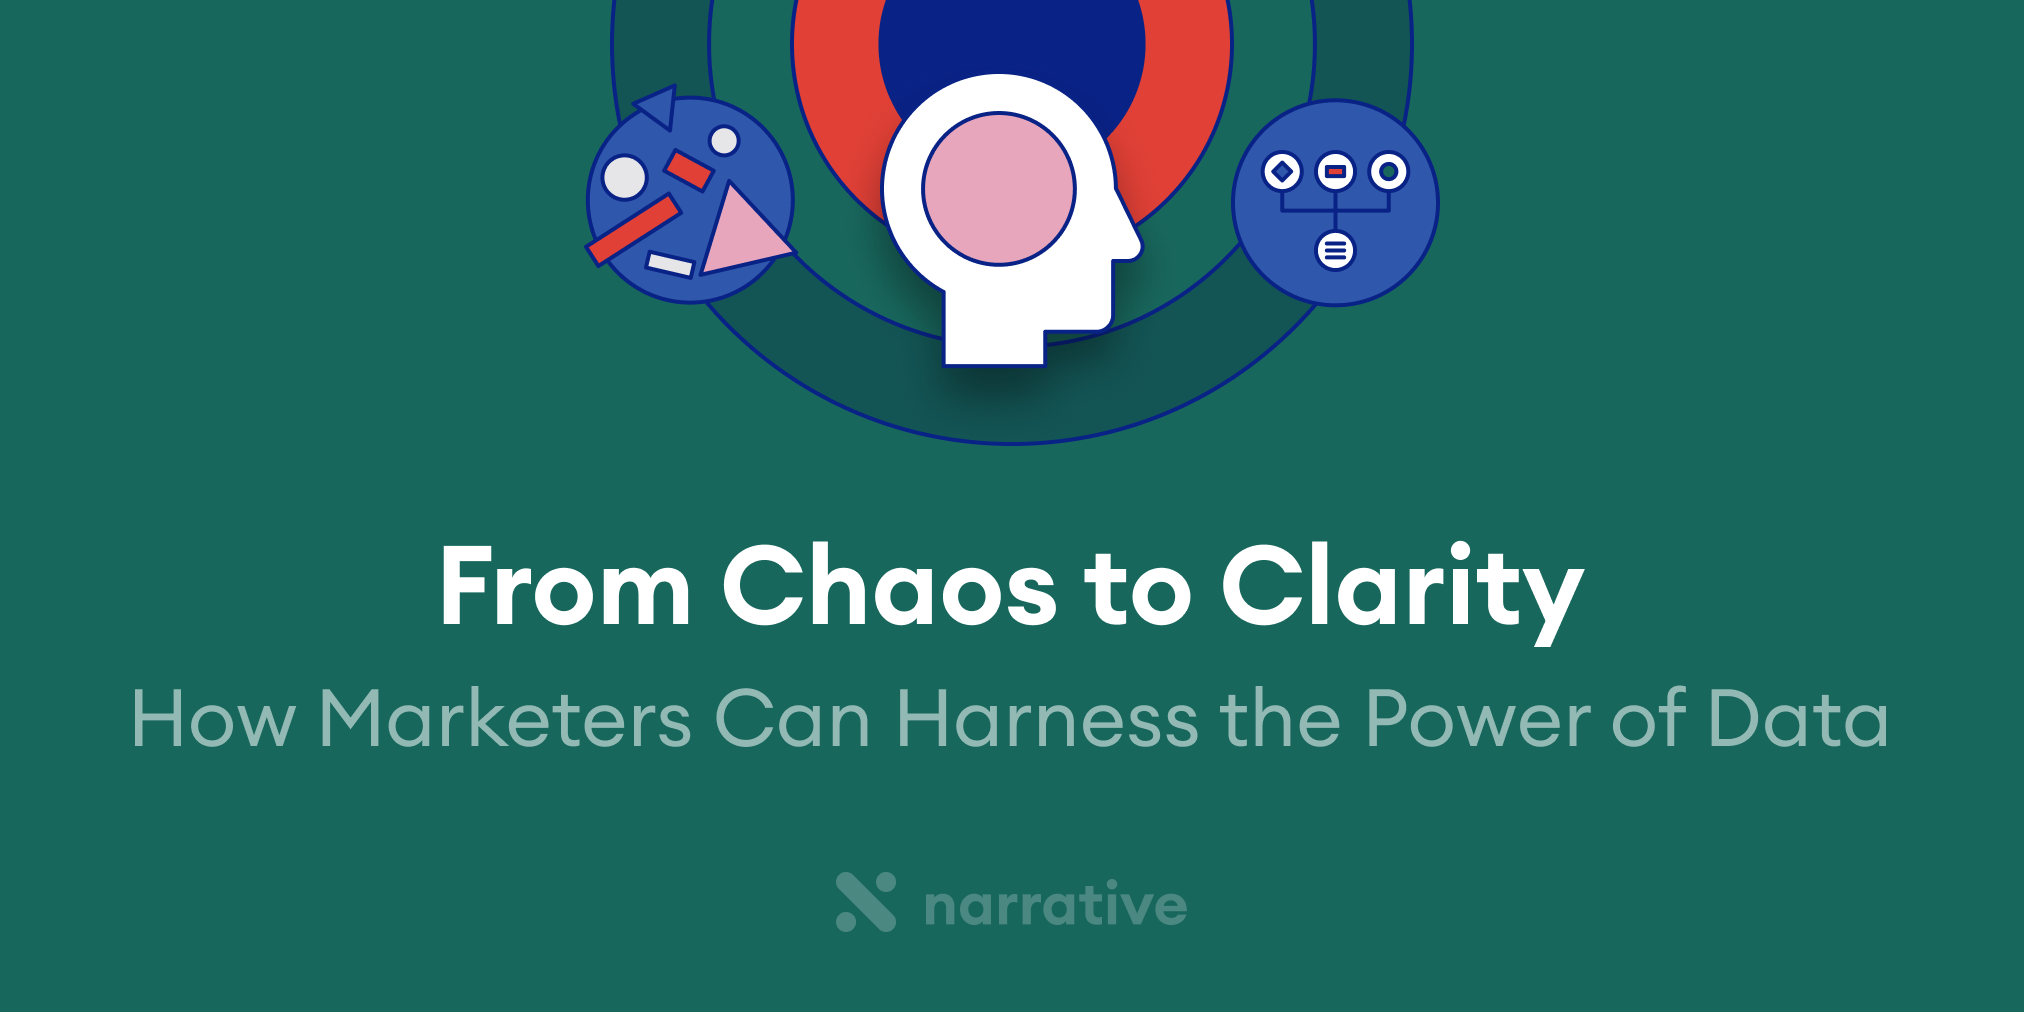 From Chaos to Clarity: How Marketers Can Harness the Power of Data